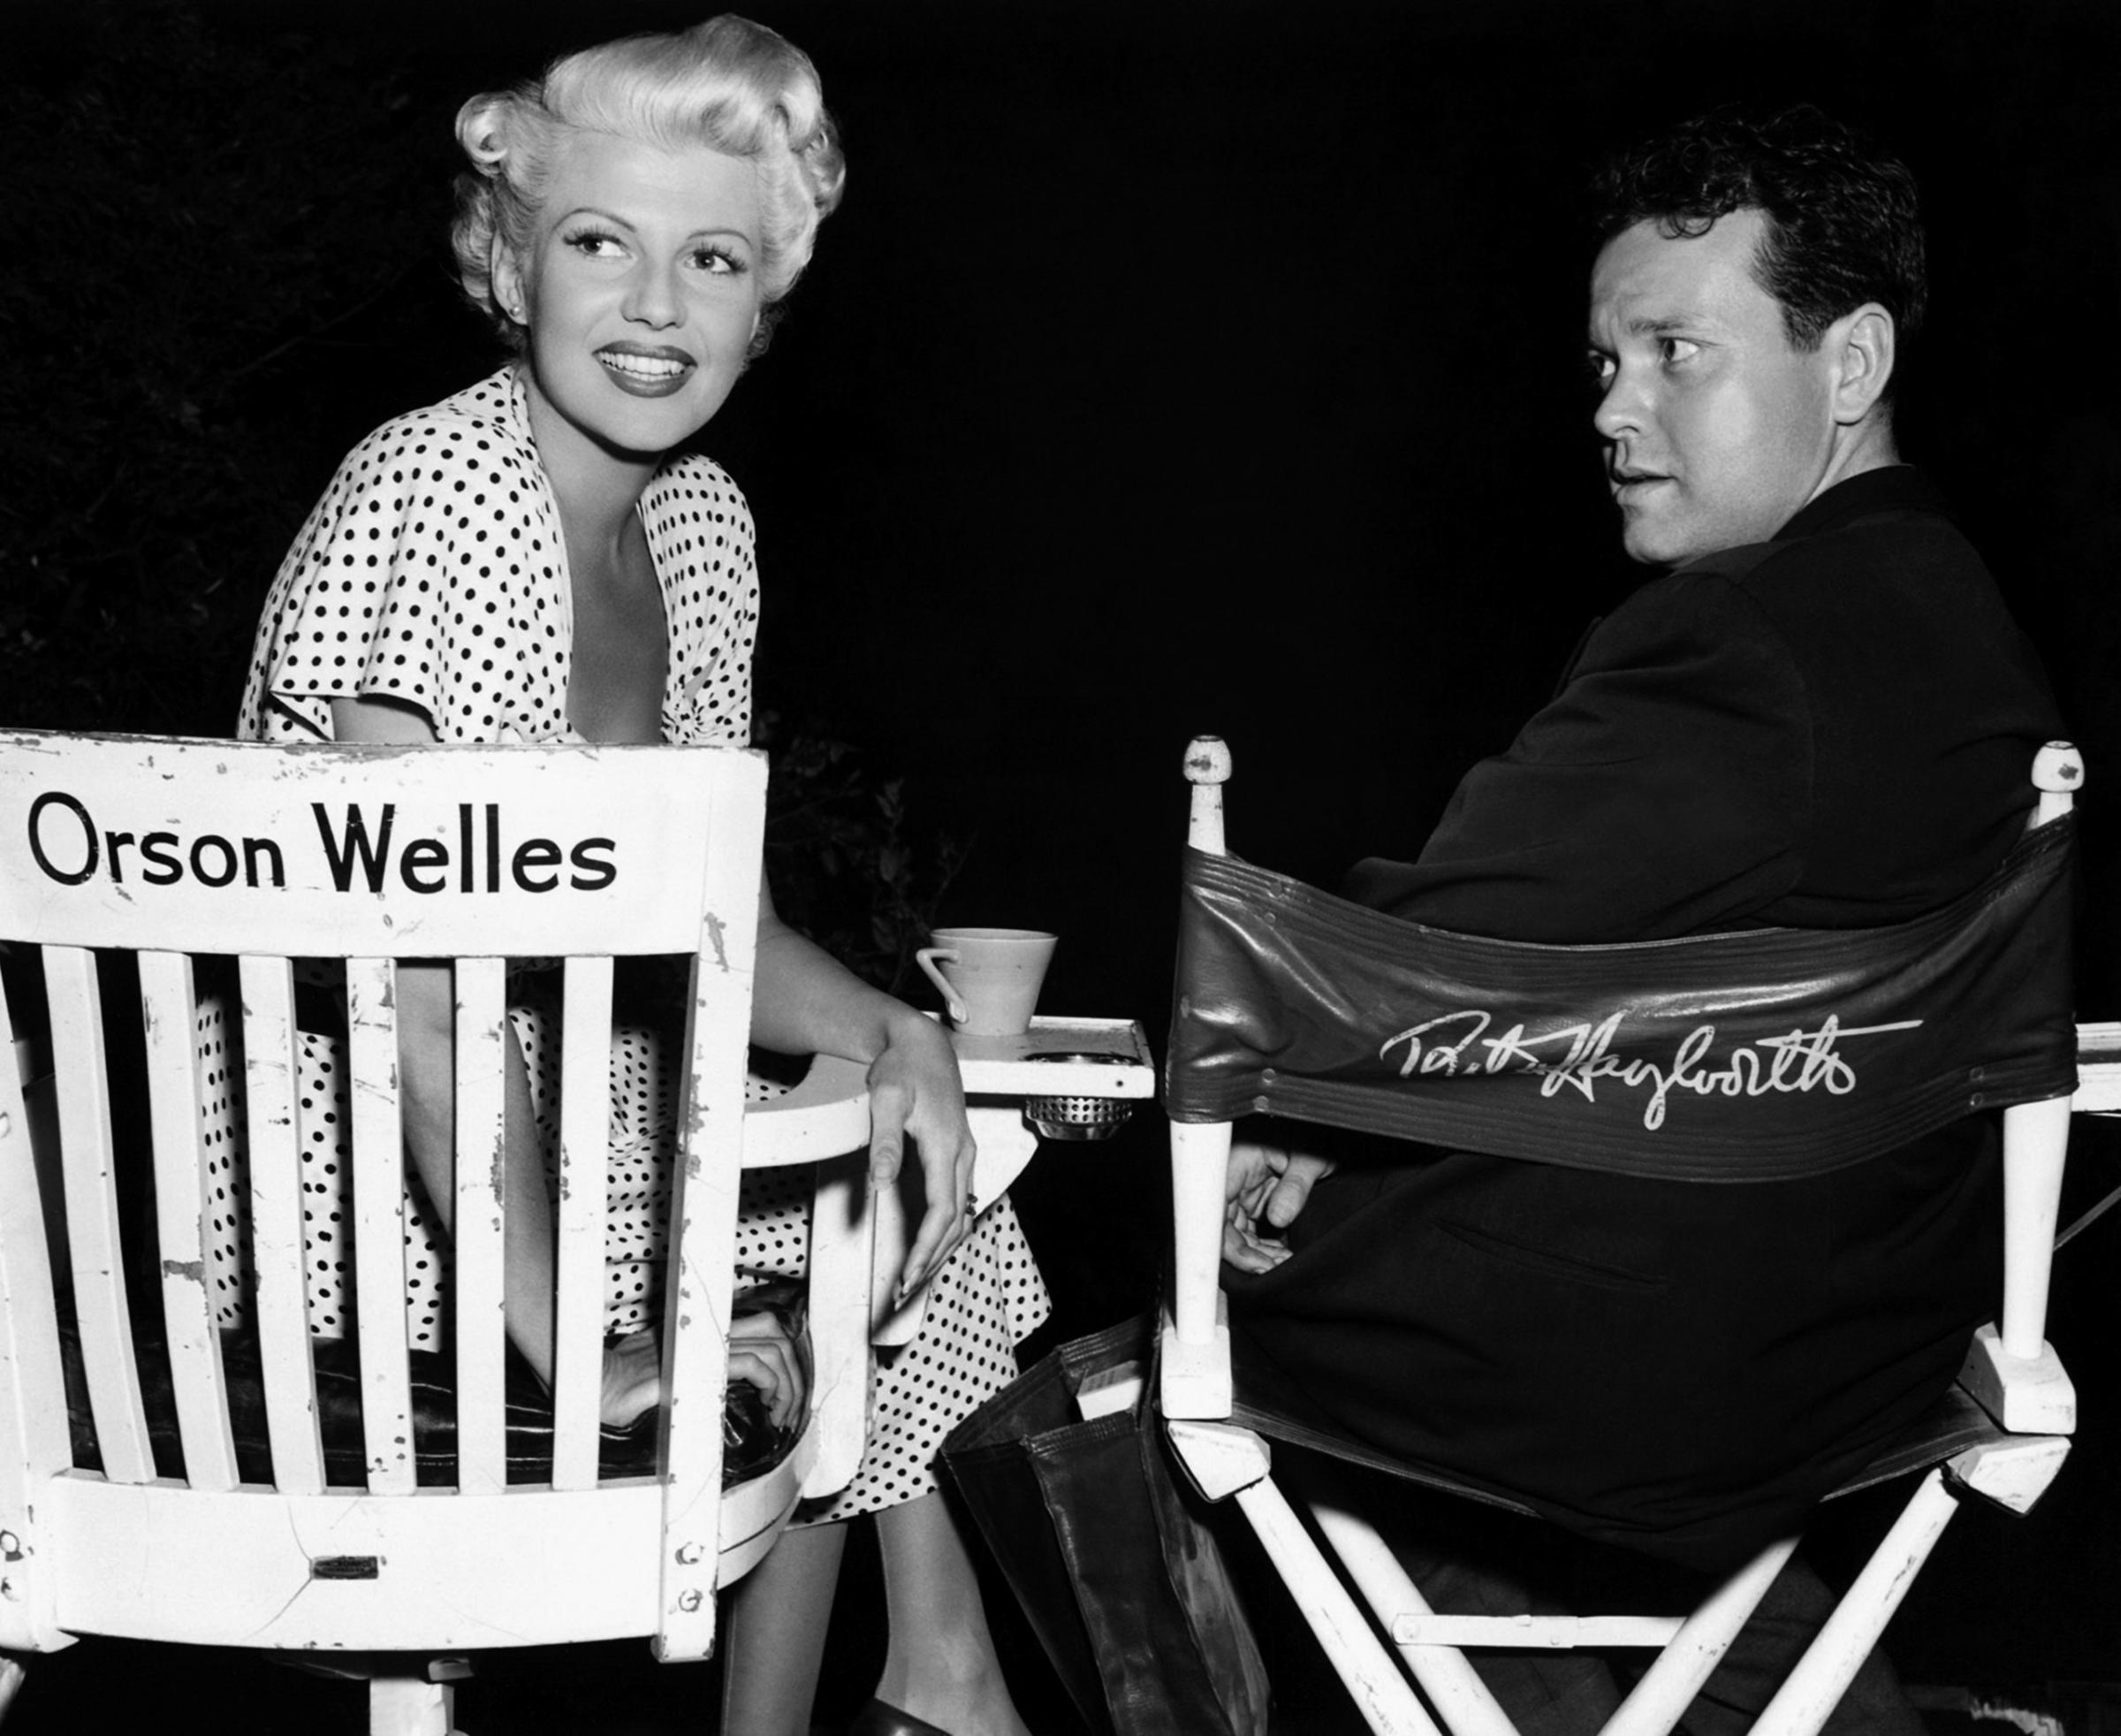 Orson Welles And Rita Hayworth on the set of The Lady From Shanghai 1947